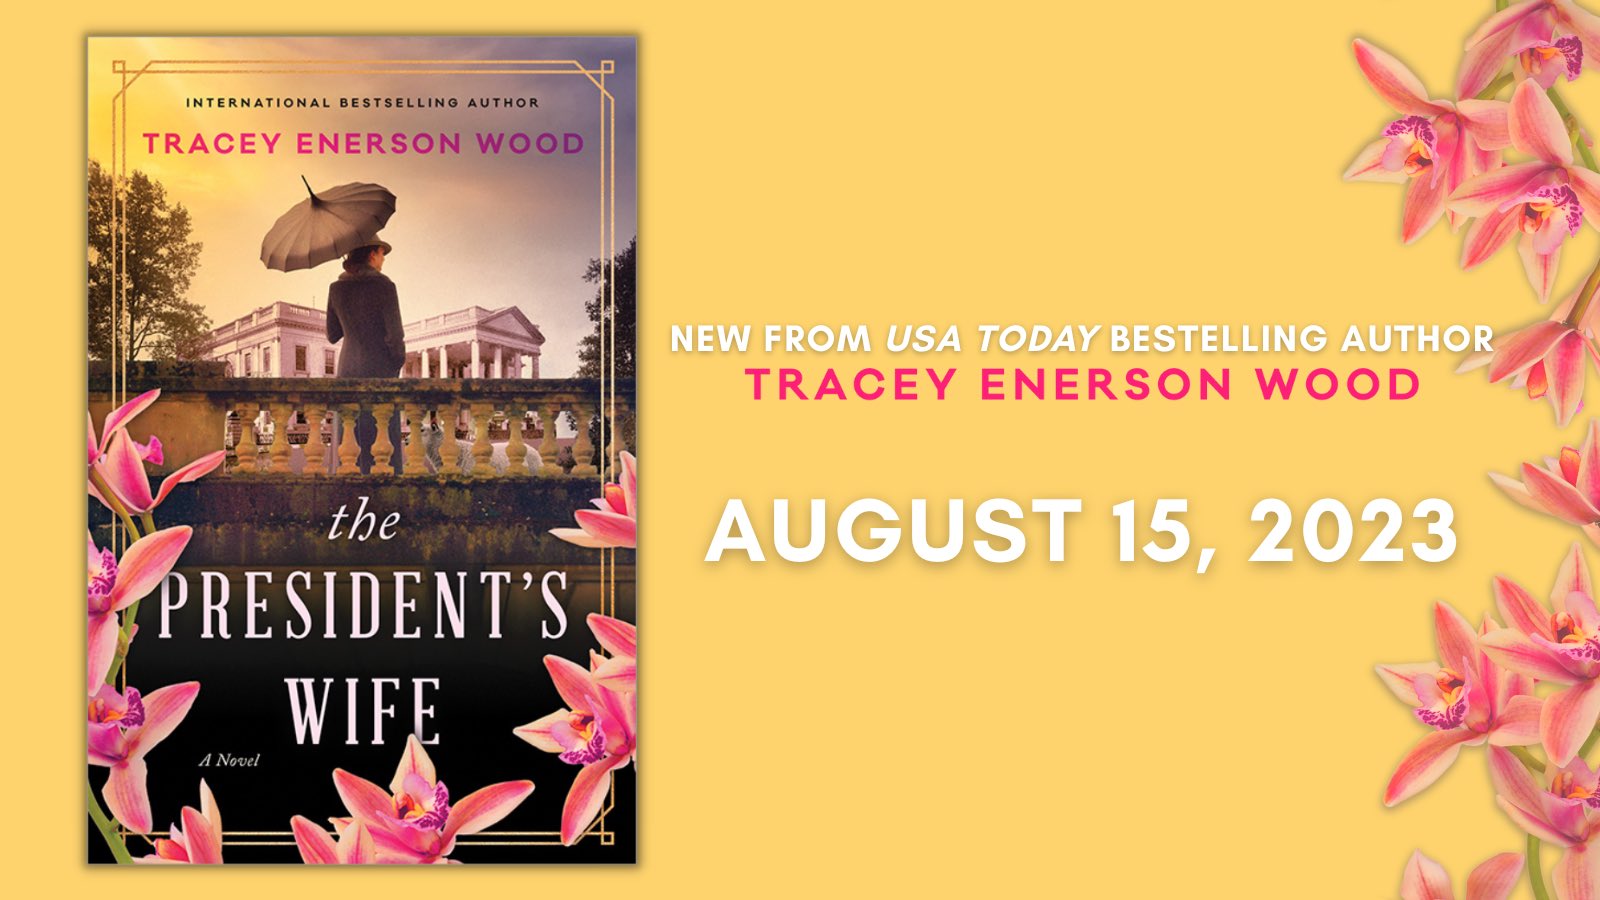 The President's Wife - August 15, 2023